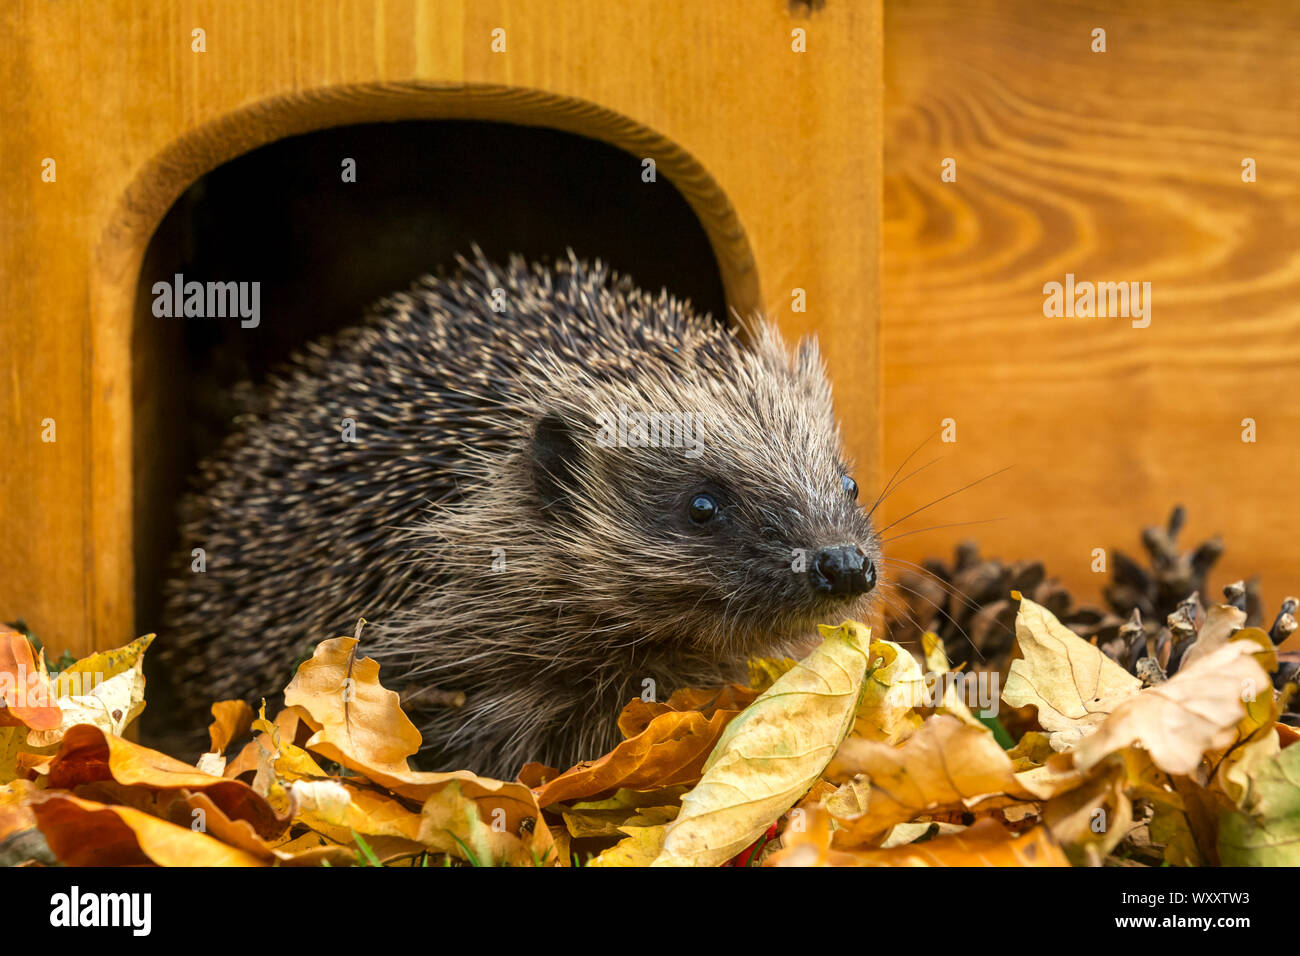 Hedgehog, (Scientific name: Erinaceus europaeus) Native, wild European hedgehog in Autumn with golden leaves leaving a hedgehog house. Facing right. Stock Photo